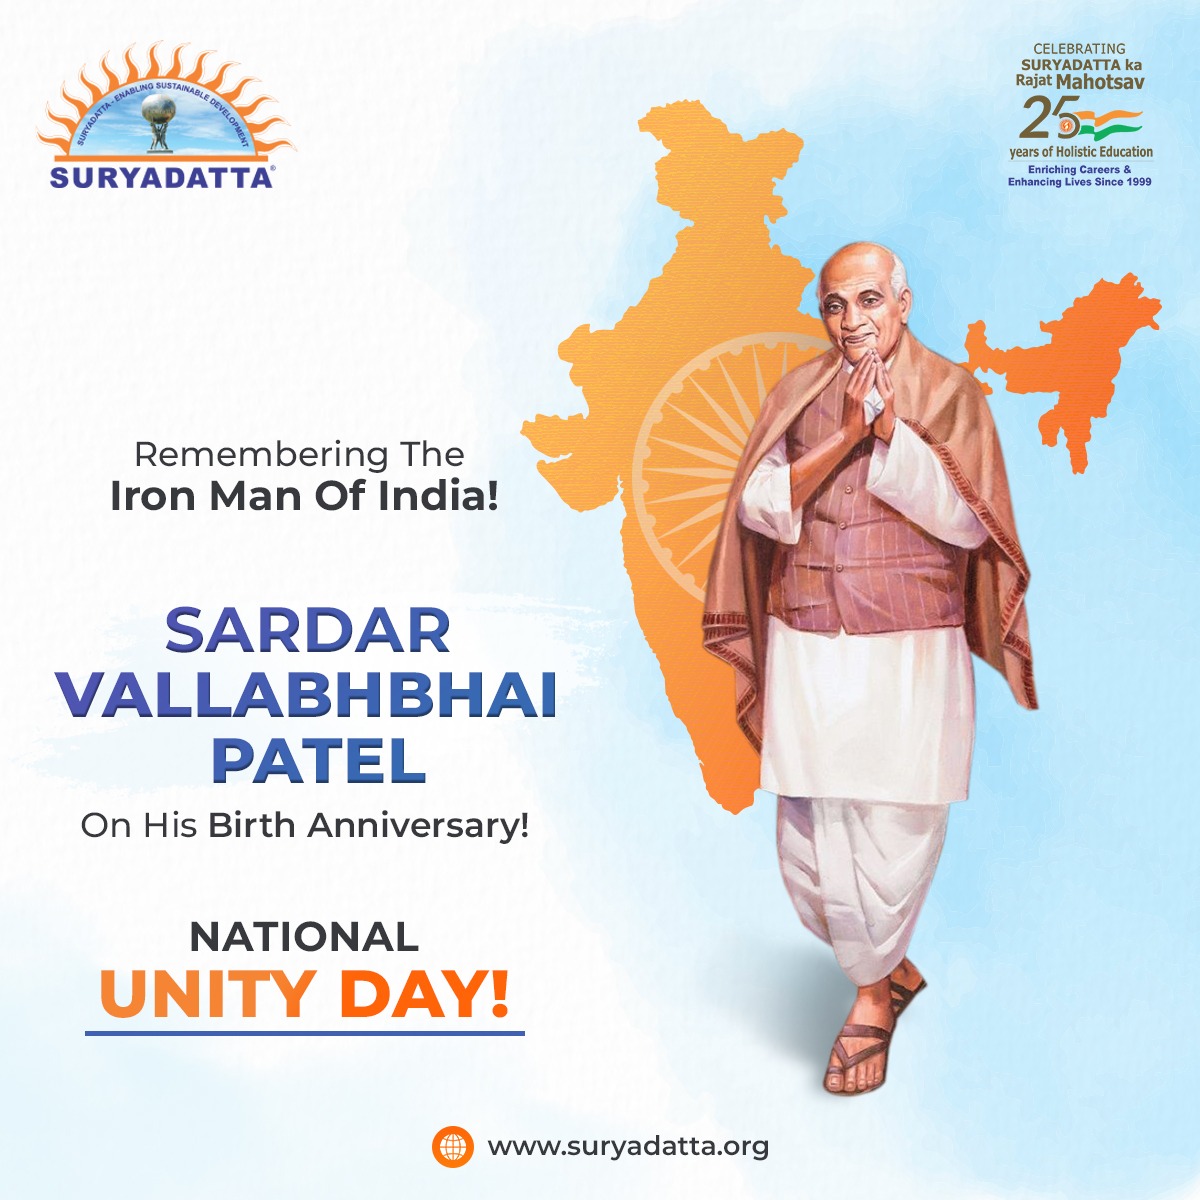 Celebrating National Unity Day! Today, we pay tribute to the great leader 'Sardar' Vallabhbhai Patel, who played a crucial role in bringing together the diverse states of India. #SGI #NationalUnityDay #SardarVallabhbhaiPatel #IronManOfIndia #UnityInDiversity